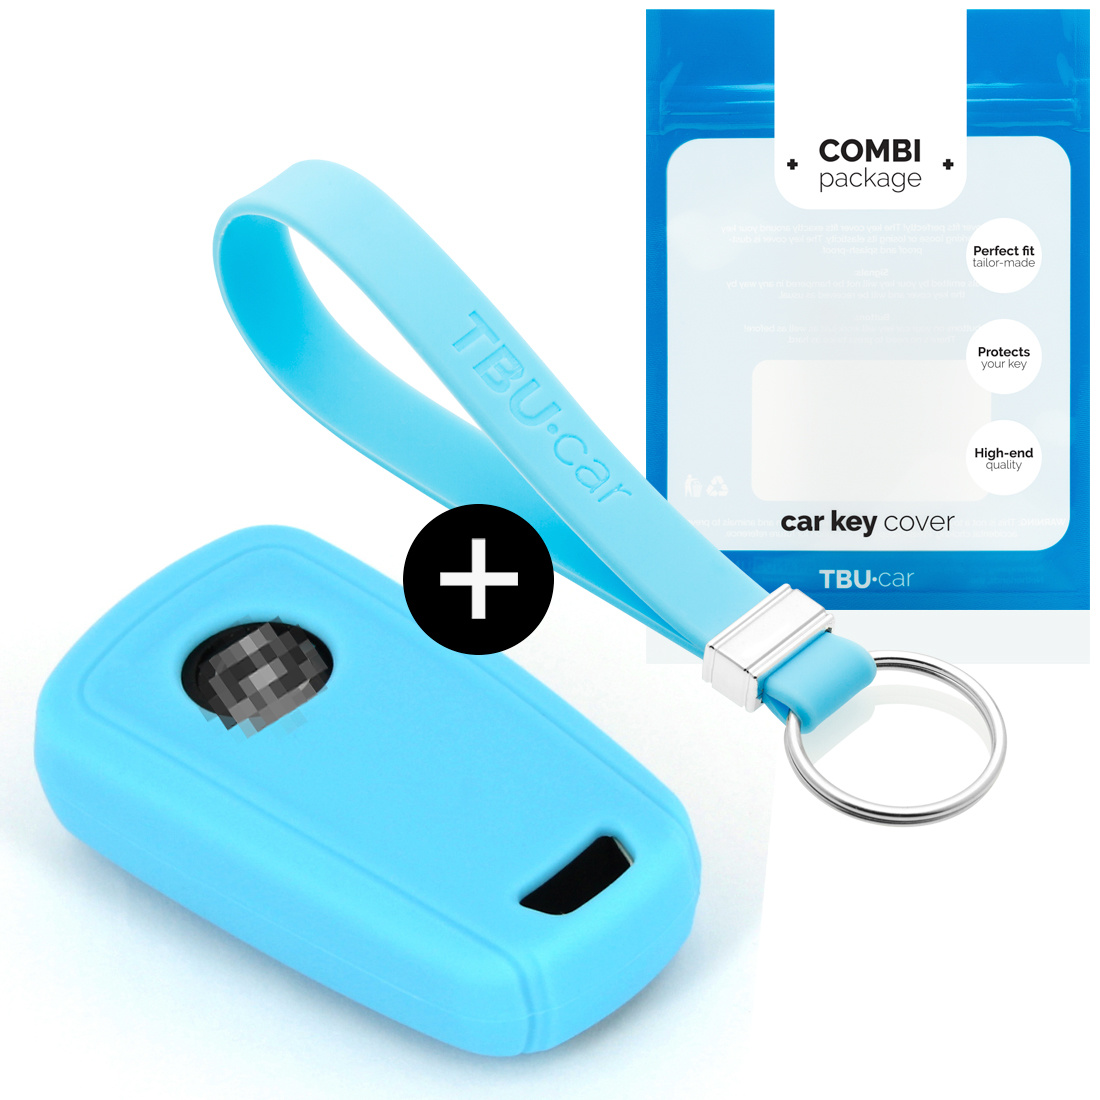 TBU car TBU car Car key cover compatible with Chevrolet - Silicone Protective Remote Key Shell - FOB Case Cover - Light Blue